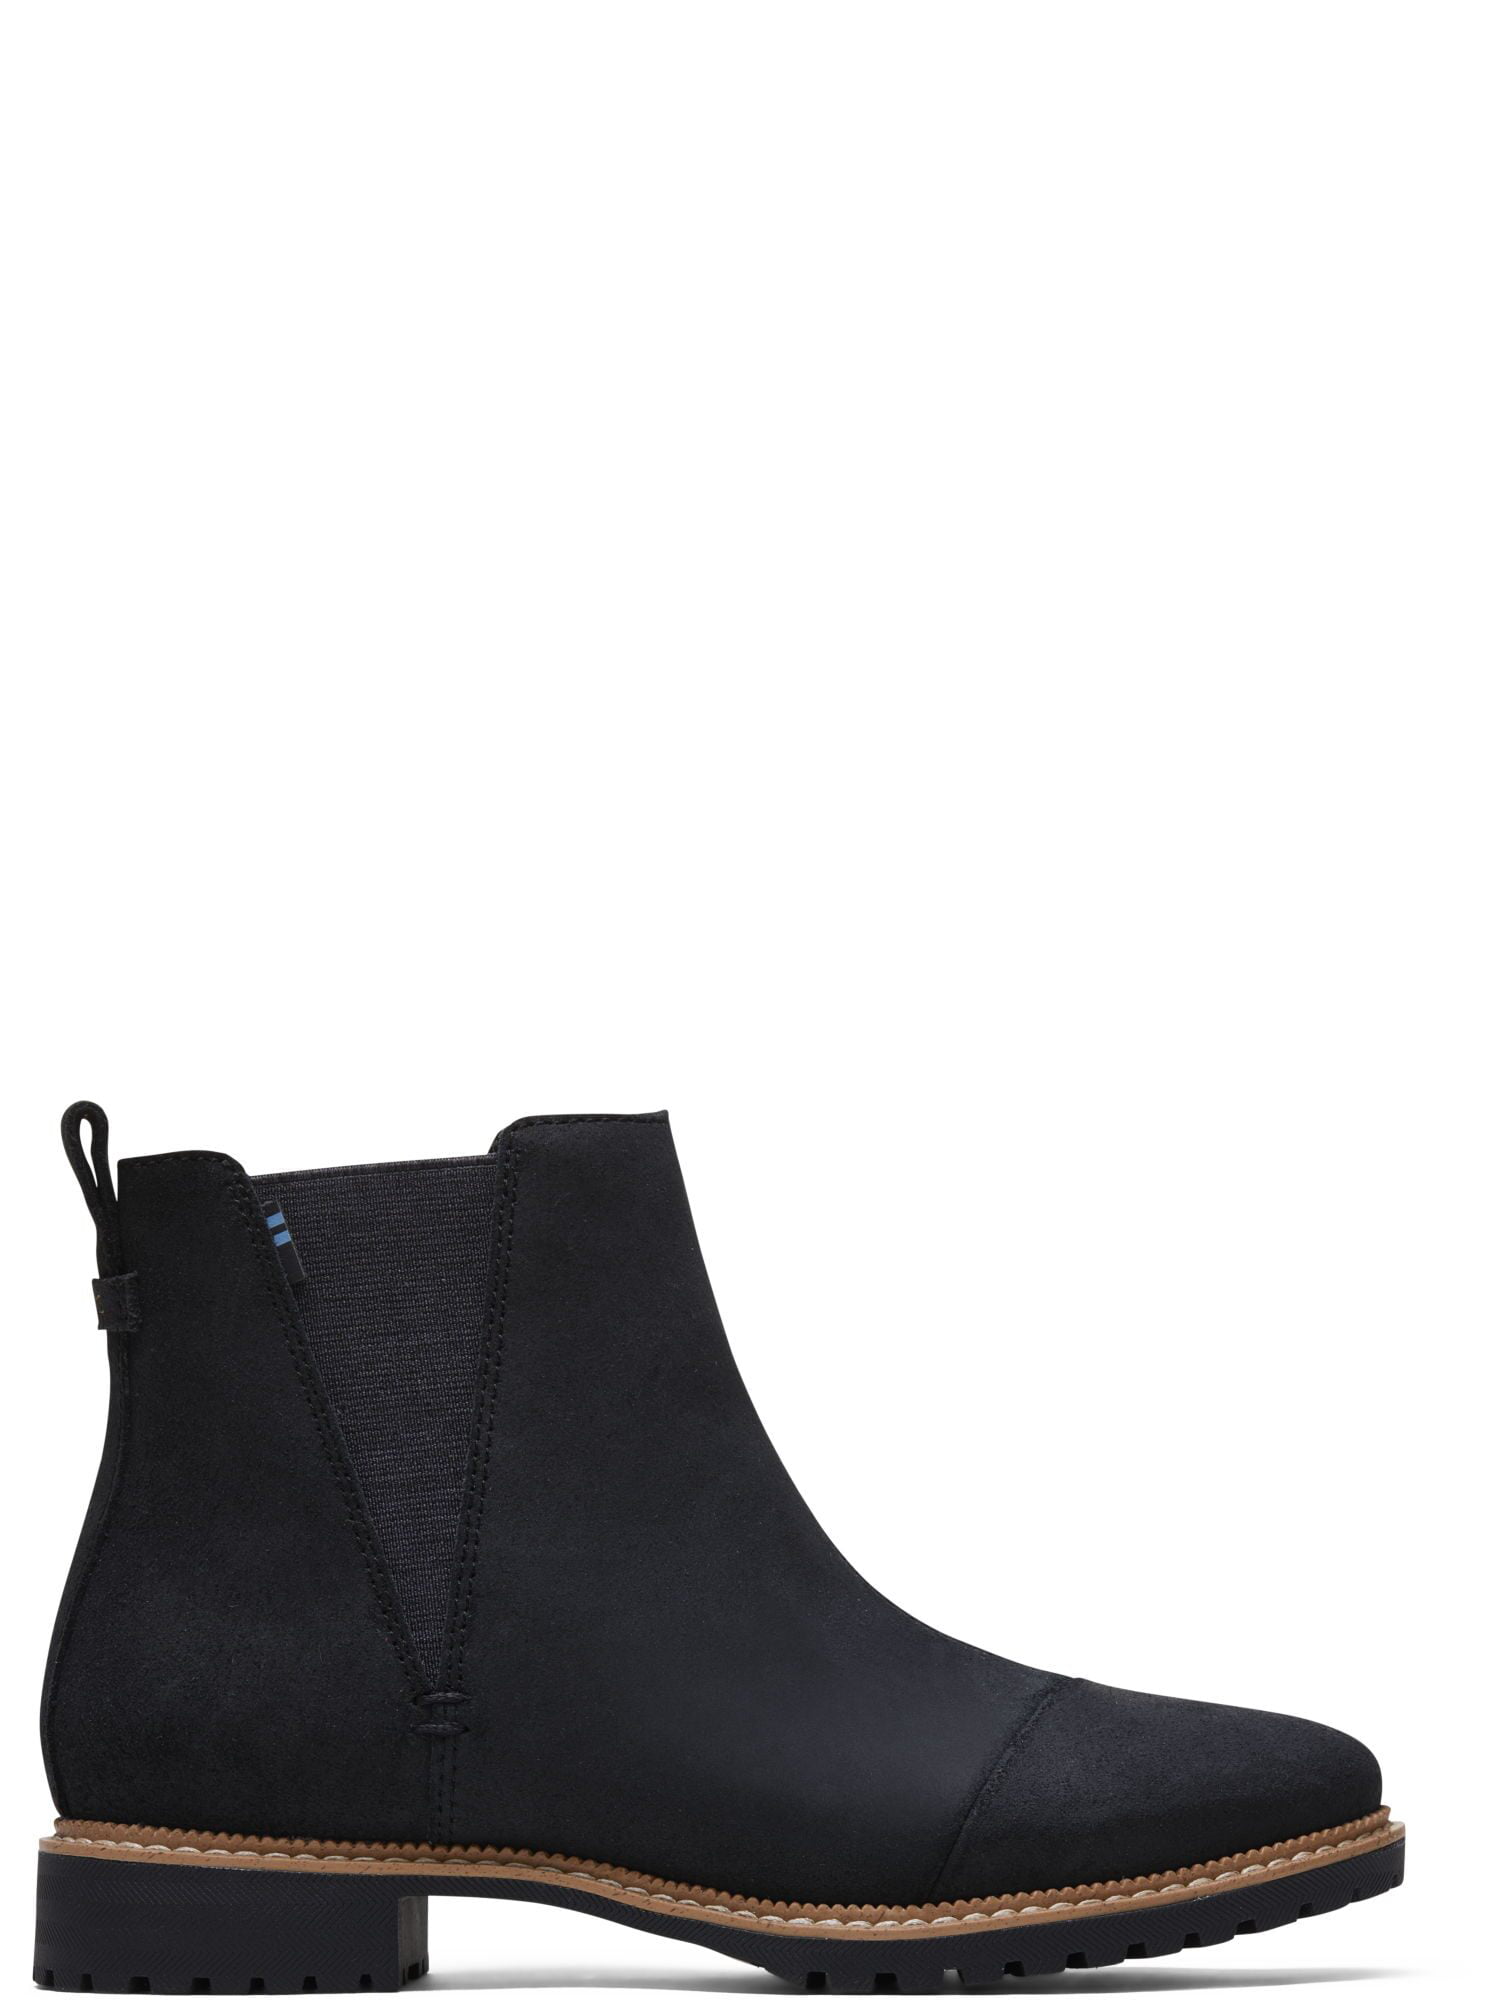 toms water resistant boots